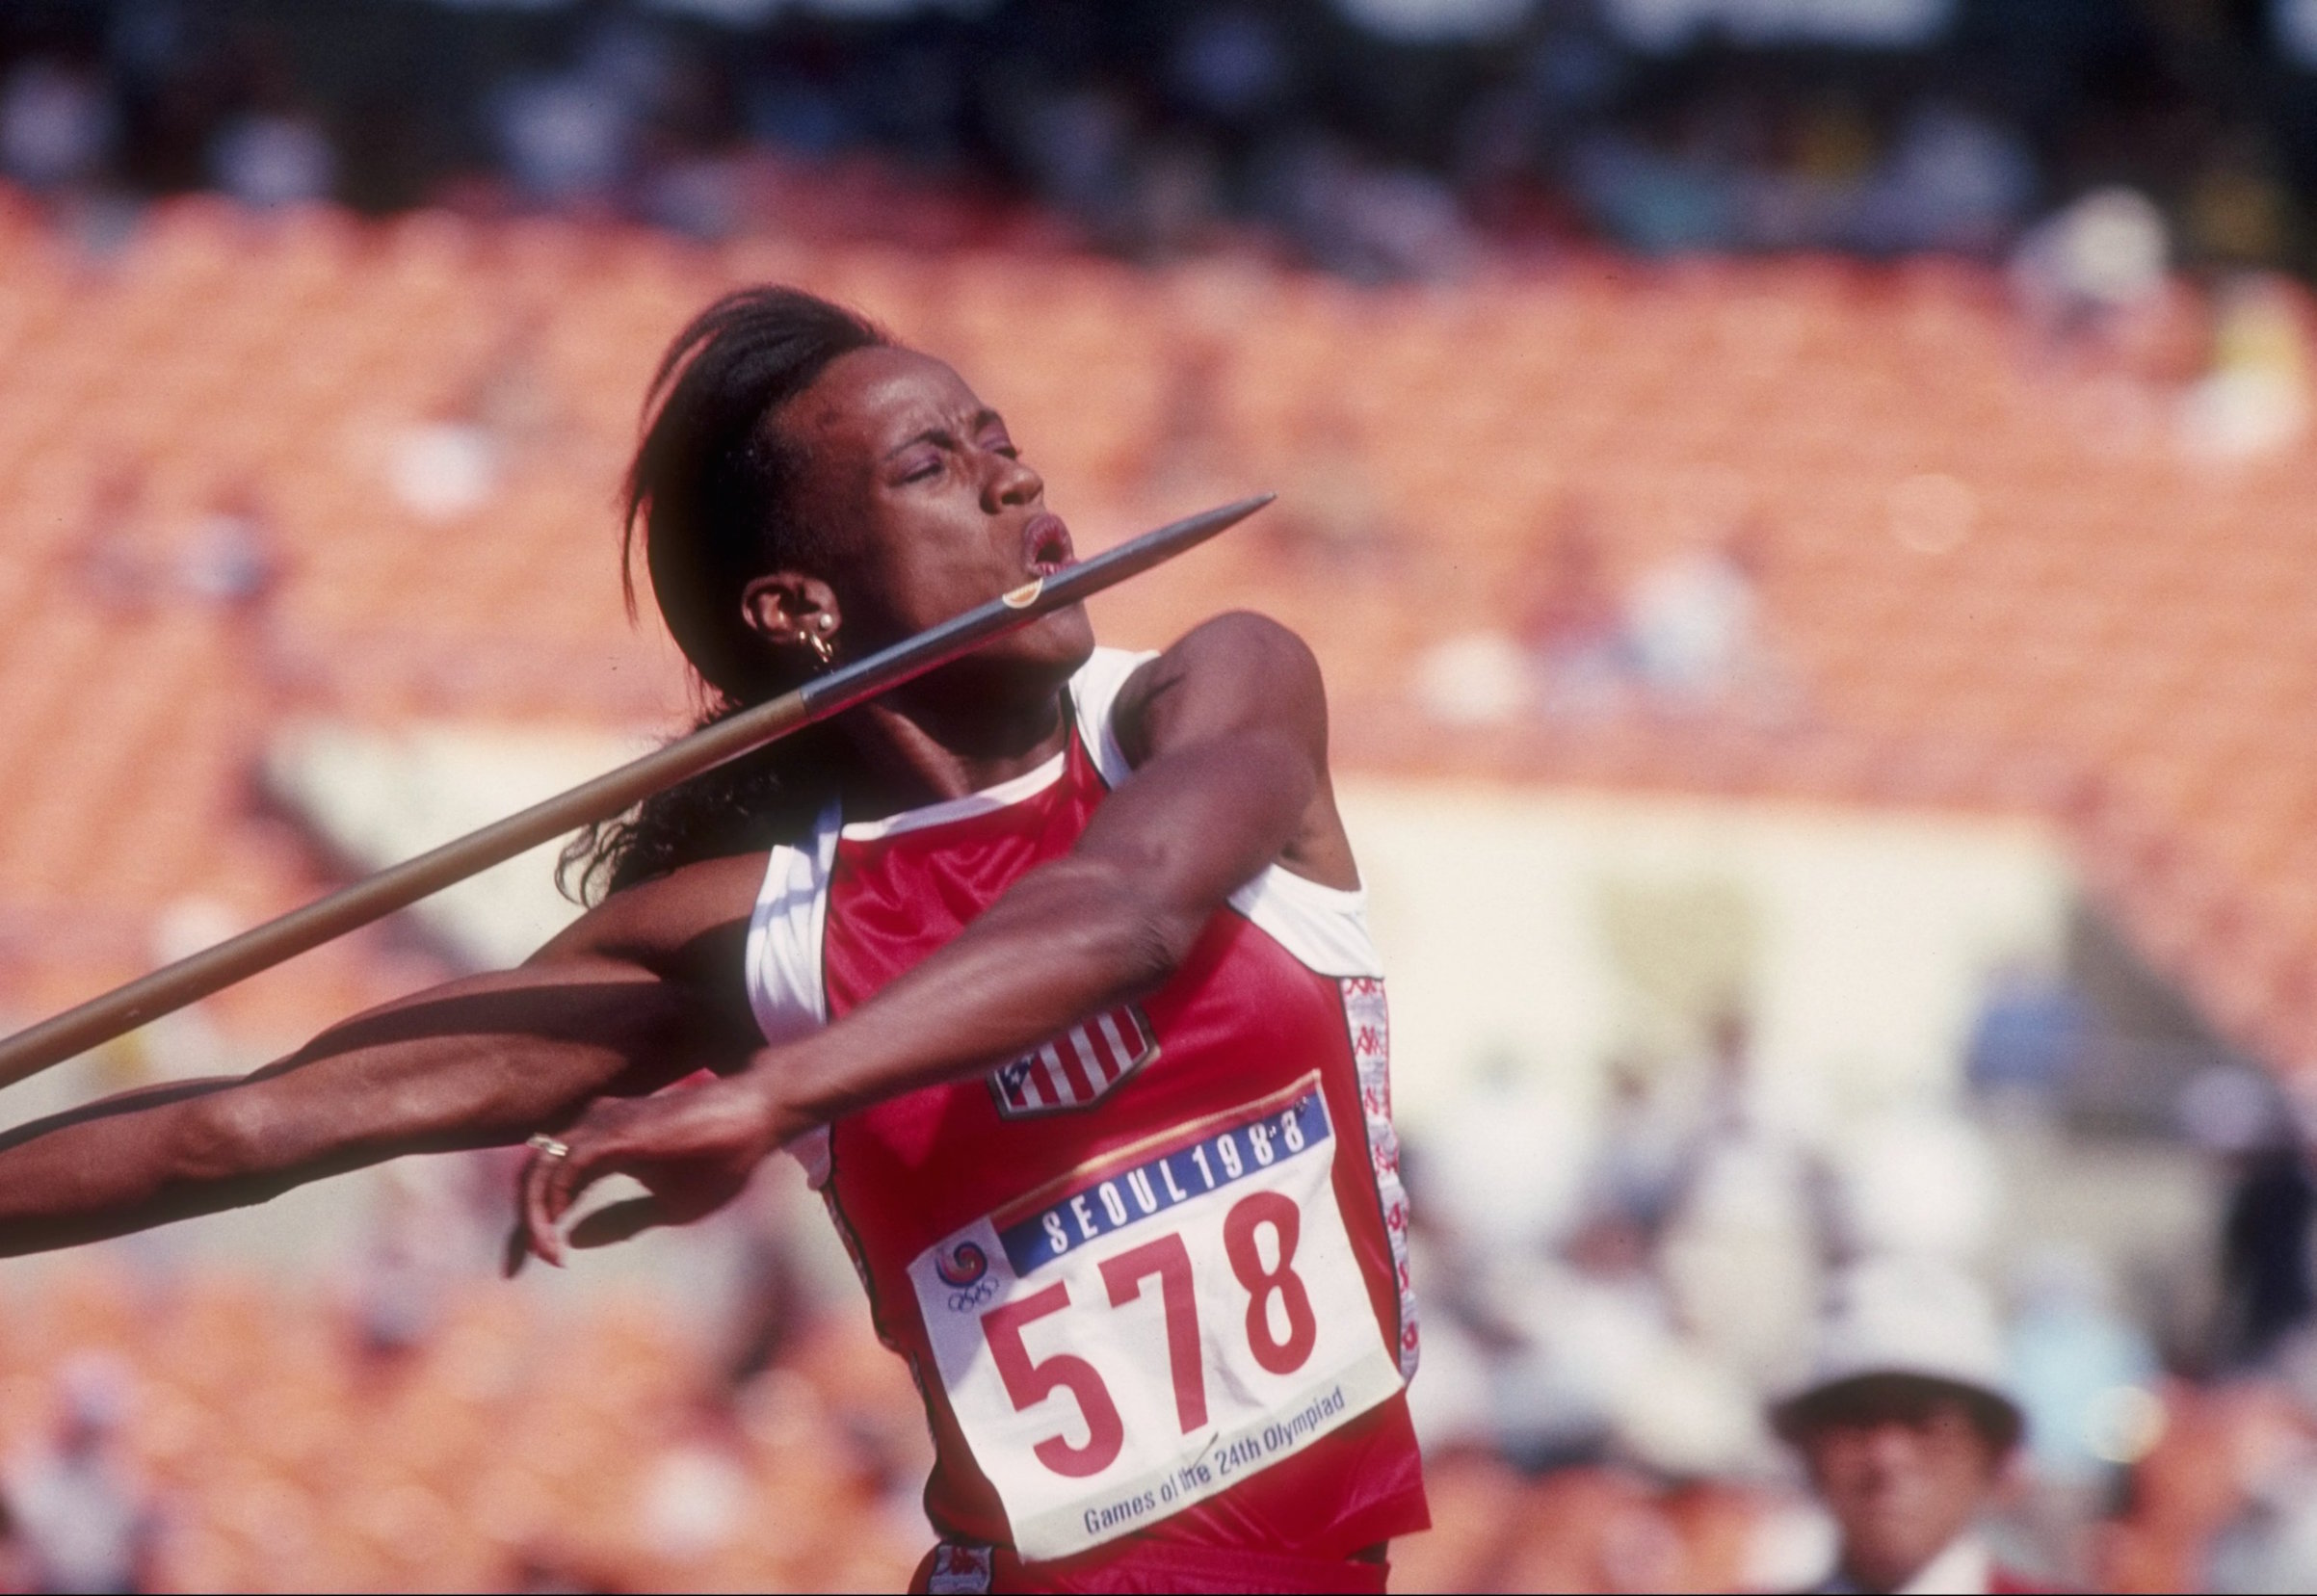 Jackie Joyner-Kersee of the United States is ready to throw the javelin during the Olympic Games in Seoul, South Korea, in 1988. Tony Duffy—Getty Images (Tony Duffy—Getty Images)